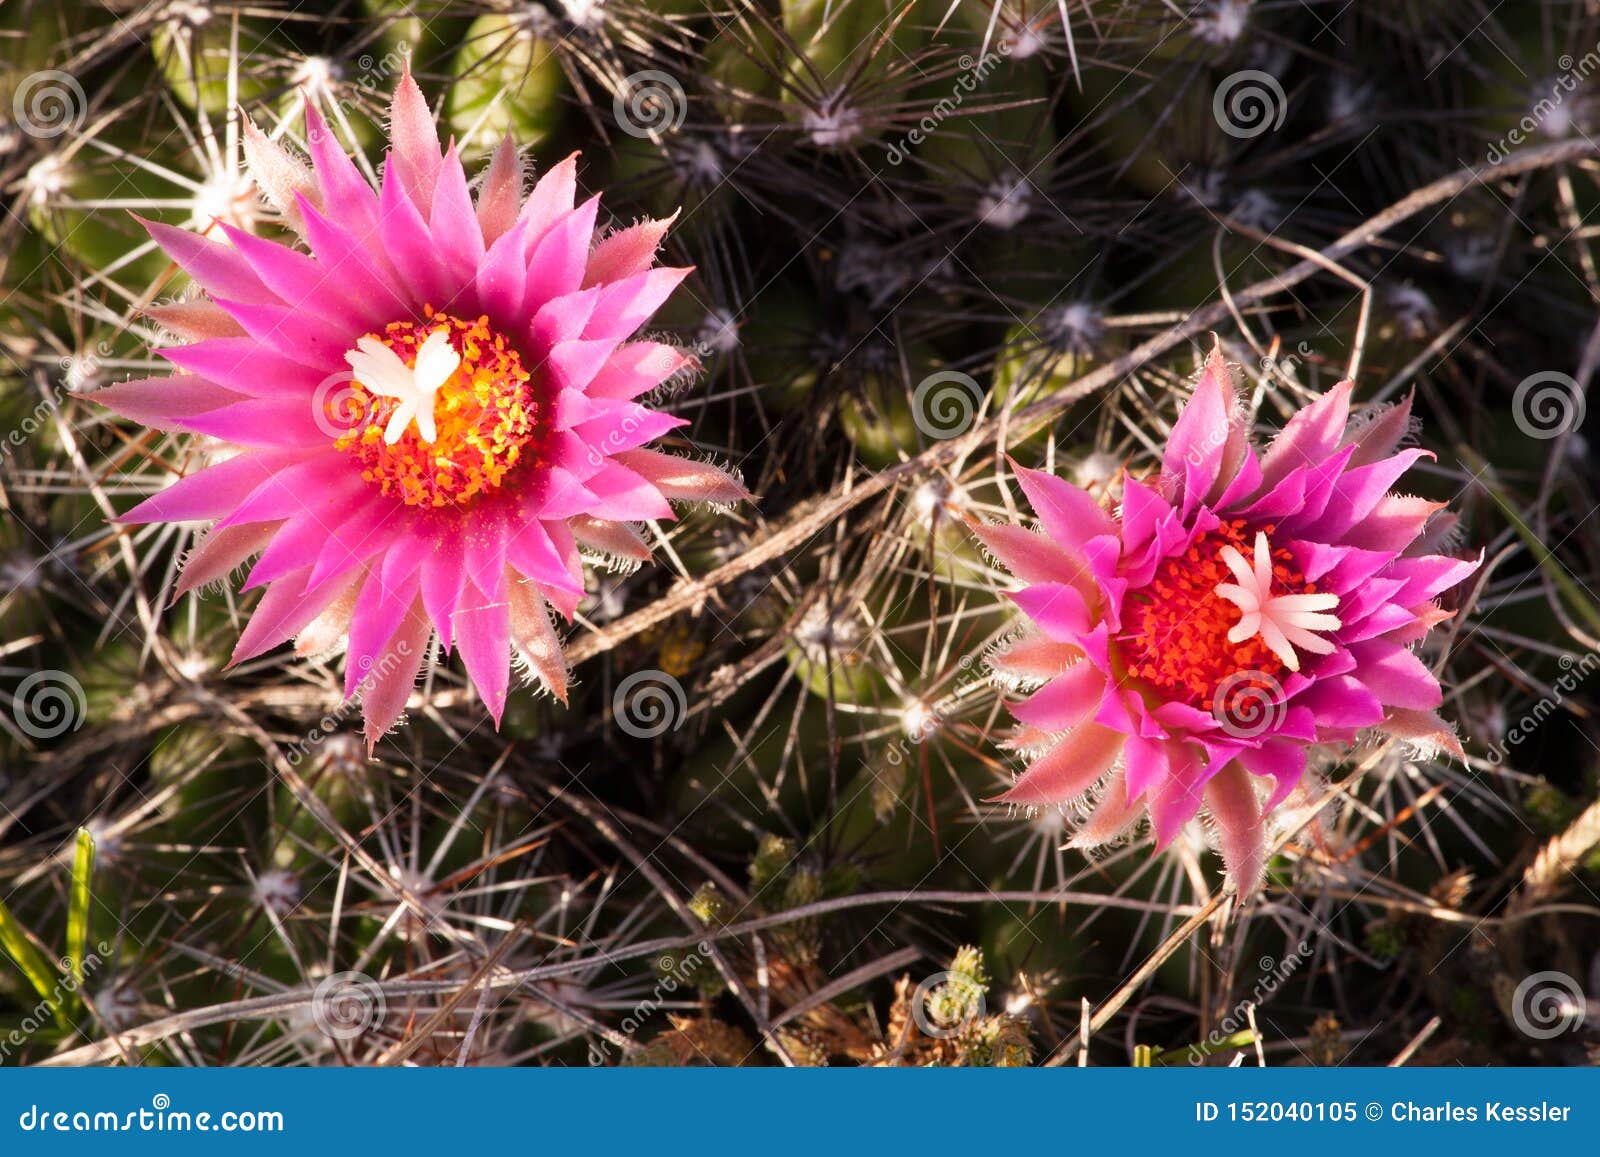 pincushion cactus in the early morning at big stone nwr